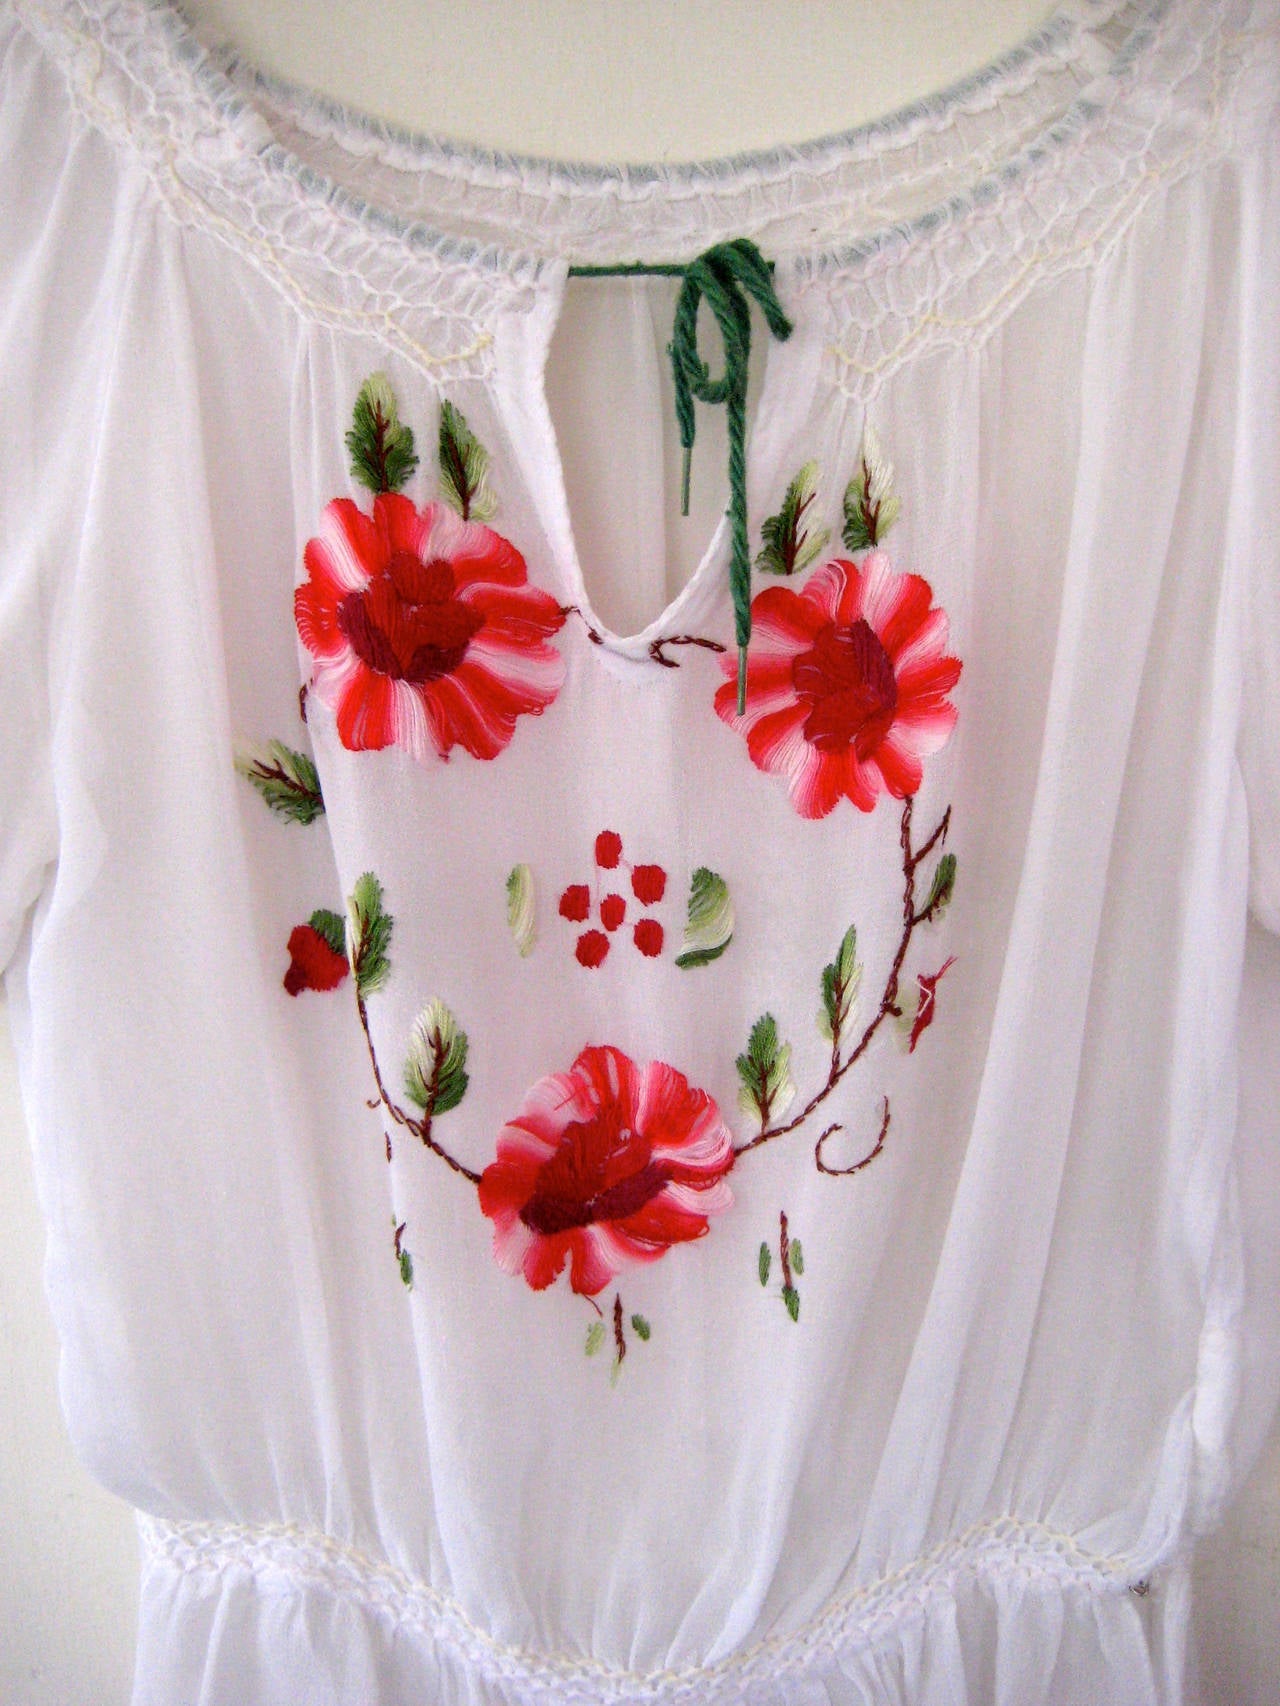 Exceptional hand embroidered peasant blouse .This dates to the 1930s and it is smocked at the bodice and the waist 

True drawstring at the neckline .Lovely embroidered flowers .Fabric appears to be silk crepe or perhaps a blend of silk and cotton